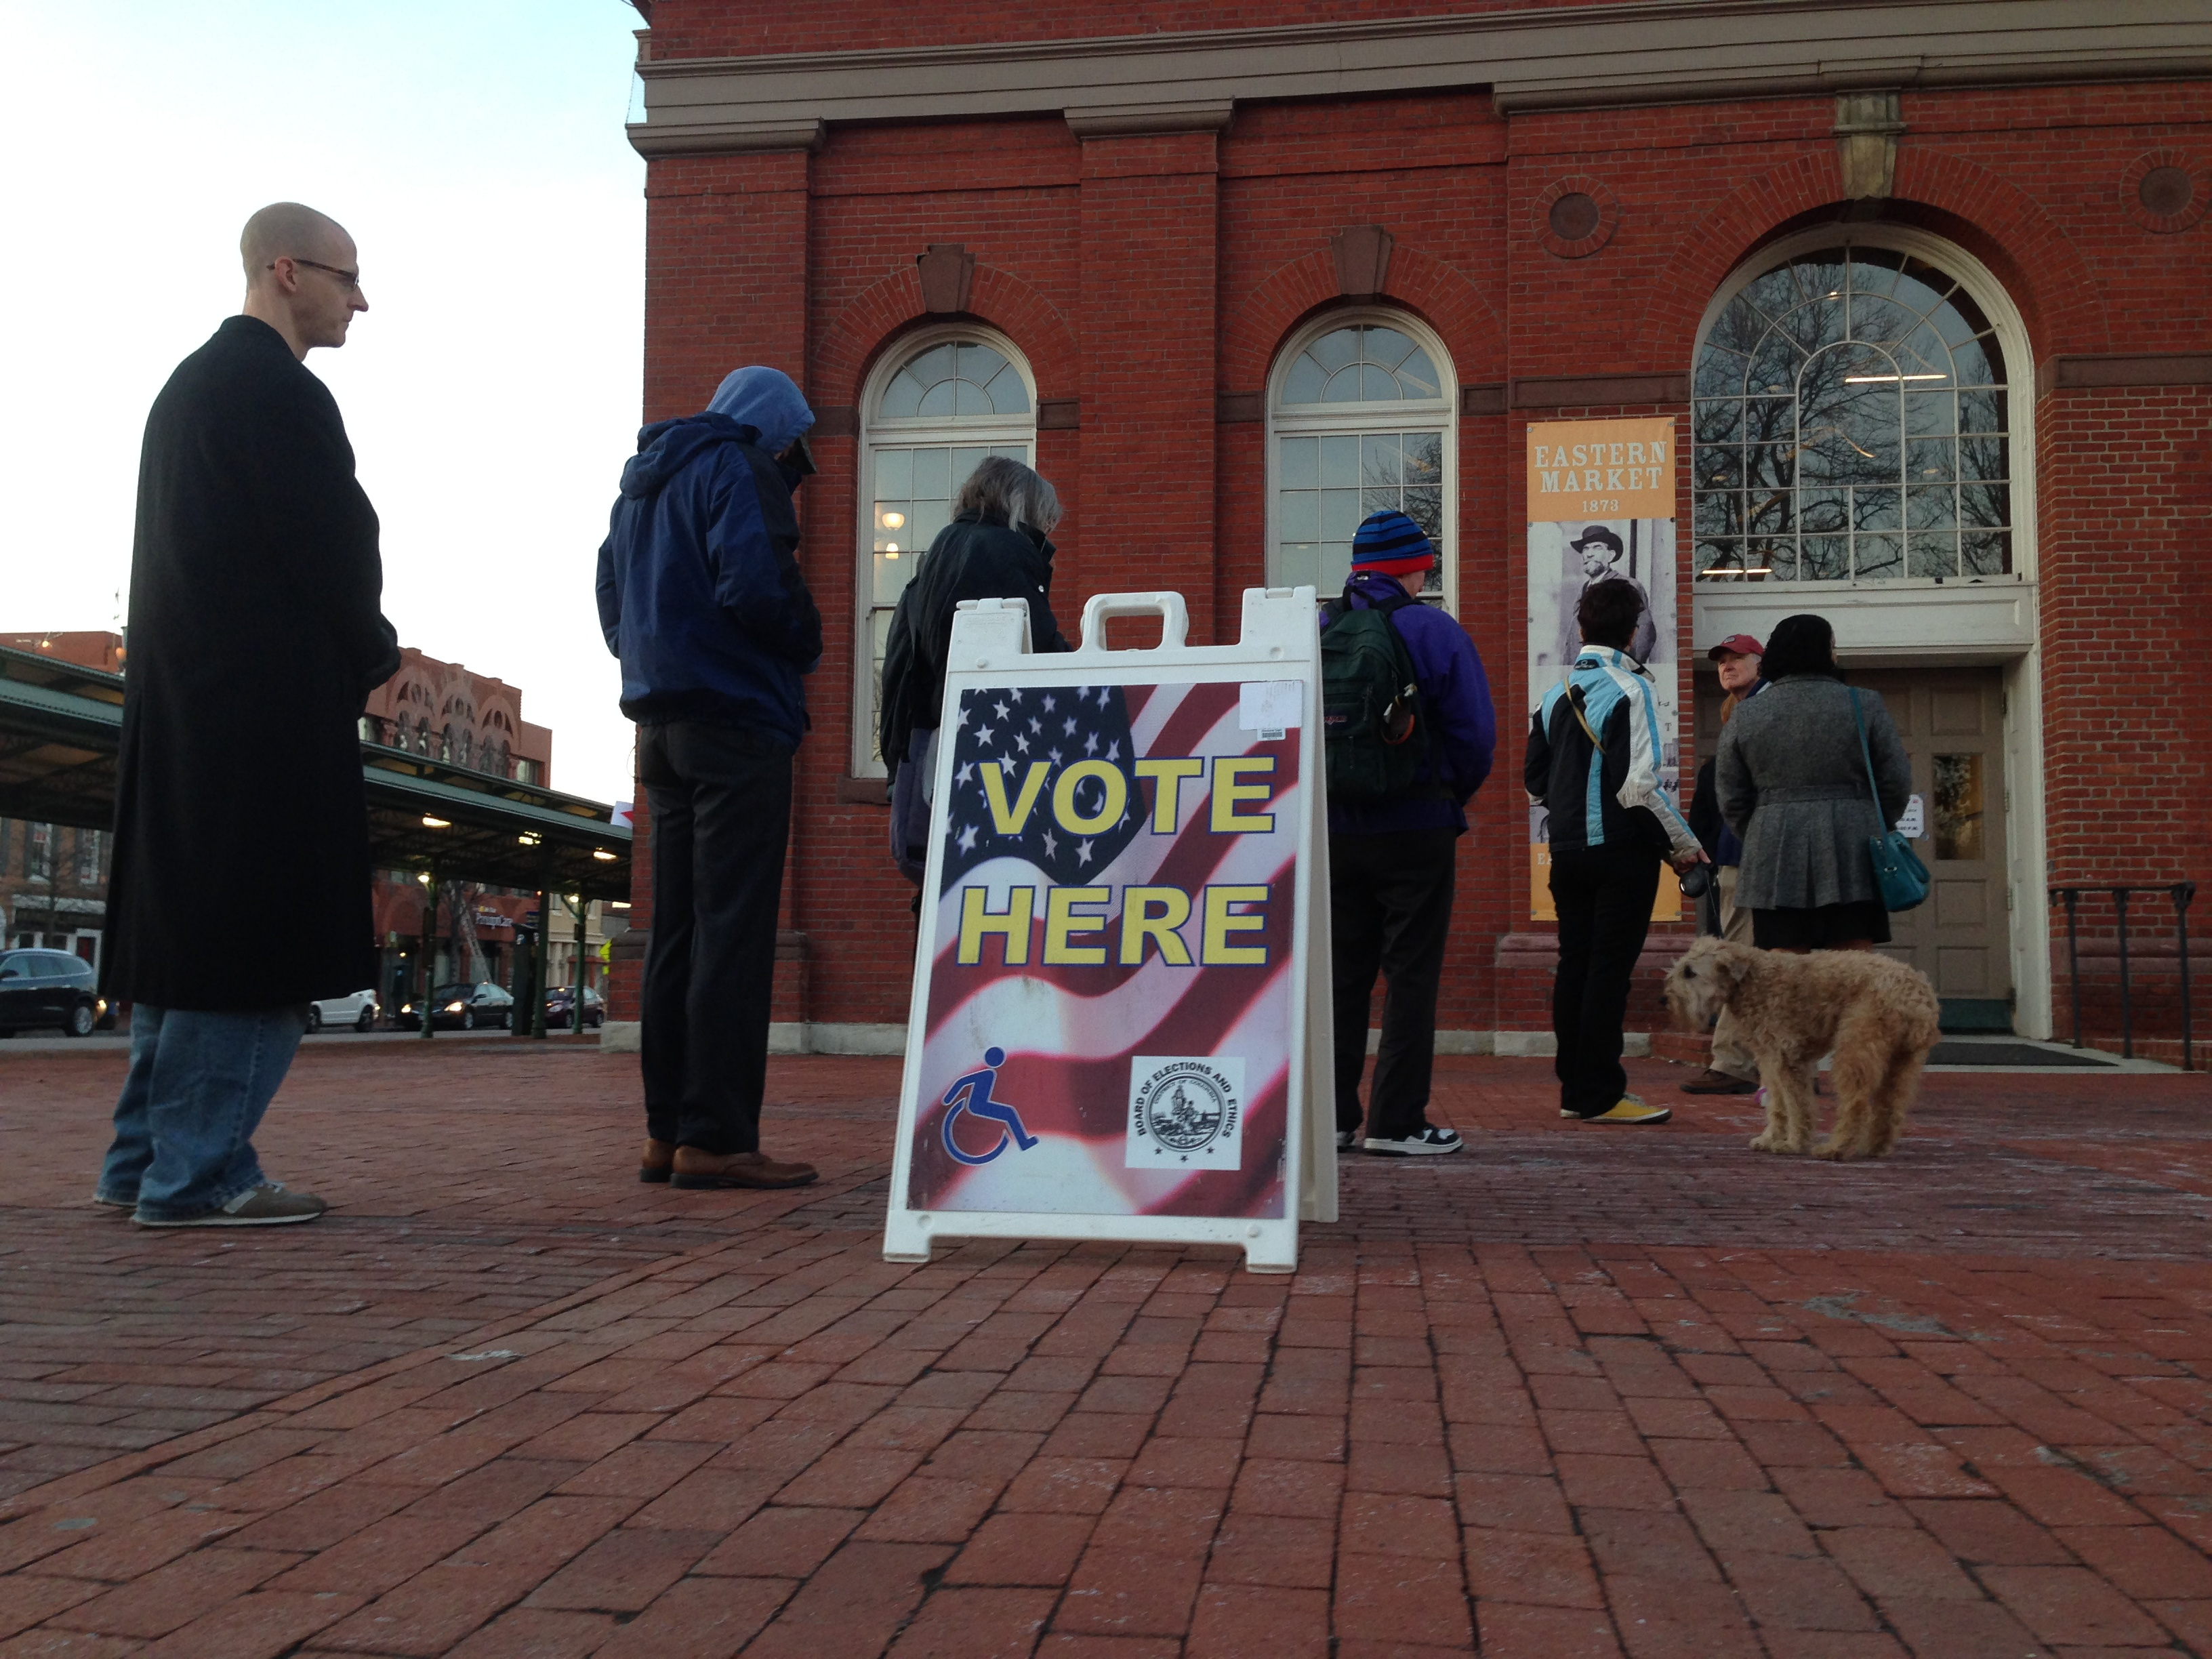 Democratic voters wait in line at the Eastern Market polling place to vote in the Democratic primary for the District's mayor race in Washington, April 1, 2014. (The Washington Post/Getty Images)